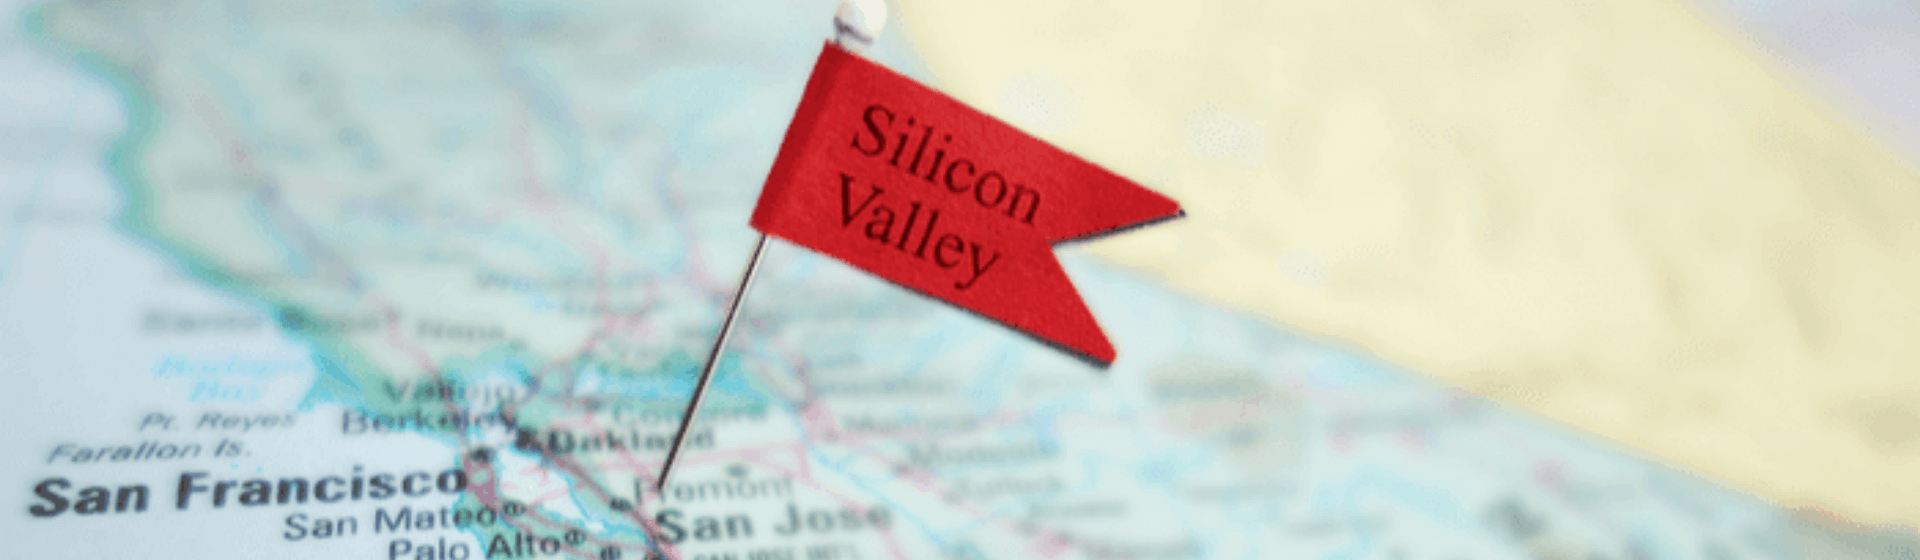 Stripe Atlas is Only for Silicon Valley Startups